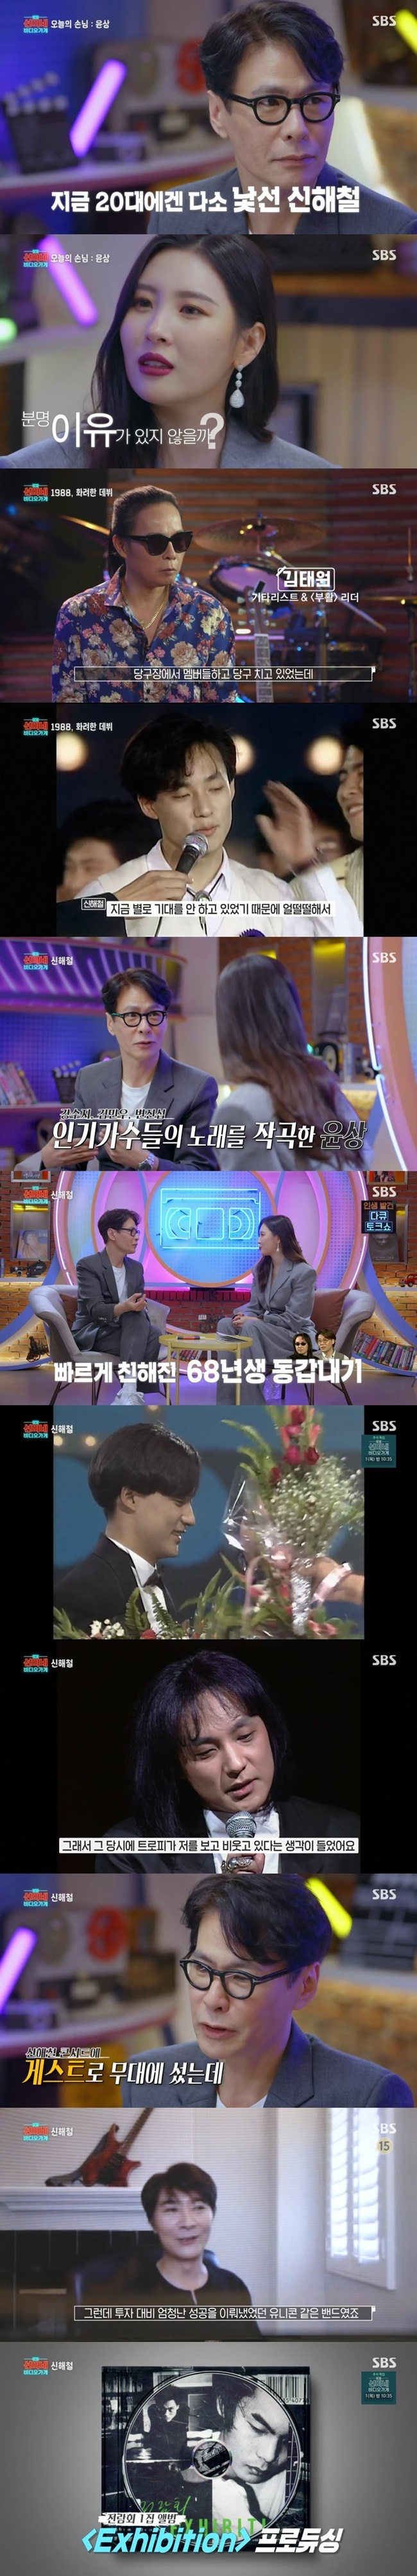 Singer Yoon Sang and Sunmi reexamine the late Shin Hae-cheol Music life.On September 27, SBS Sunmine Video shop talked about the late Shin Hae-cheol.On that day, Yoon Sang found Sunmis video shop.Yoon Sang asked Sunmi why he talked about Shin Hae-cheol, and Sunmi said, My peers do not know Shin Hae-cheol.I thought there was a reason why so many people were emphatically memorizing, he said.Yoon Sang said: It was Friend who spent the most time together in his 20s.I think I should tell you about the Friend of Shin Hae-cheol through this opportunity. Sunmi played a specially produced video of Shin Hae-cheols life; his first start was his debut song, Infinite Orbit.The song was awarded the MBC MBC College Musicians Festival the time. Resurrection member Kim Tae Won said, I was watching TV with members at the billiard hall.Then I saw the Friend excel at the MBC College Musicians Festival. It was just amazing.I think the friend was not the first person who was able to perform experimental performances and songs, he recalled.It was a song that had a special meaning to Shin Hae-cheol, To You. It was his concert ending song and was loved by many as a cheerleader.Yoon Sang said, I teased it as a cartoon theme song.Shin Hae-cheol also said in an interview during his lifetime, I could not imagine that this song would survive so long.Shin Hae-chul was an idol of many girls at the time of his activities. Crying Nut, a boy fan of Shin Hae-cheol, said, Shin Hae-cheol was very hectic during his school days.Yang Dong-geun said, I did not know the lyrics because I was a child, but when I was in the middle of hip-hop and looked back, it was a rap called Wow.It was the lyrics I wrote knowing how to throw rap music. Hong Kyung-min recalled, At that time, Shin Hae-cheol was continuing to make an album that was a big hit these days.Yoon Sang reported an episode related to this: I have been a guest at Shin Hae-cheols solo concert hall.But everyone was looking at me like, Give my brother back. Im Yoon Sang.I was saying, Did you invite me to make me realize this?In 1992, Shin Hae-chul went back to the rock band while soloing. Bae Sun-tak said, Everyone opposed it, but I would have had a willingness to do it.So Shin Hae-cheol formed the rock band N.E.X.T.Yang Dong-geun said, My favorite song was The Knight of the Doll, followed by Fly the chick.I forgot, but I was shocked to hear the song for the first time. It was a rock band that gave me the first big, main stream feel, Bae Sun-tak, a music writer, recalled about N.E.X.T.At that time, guitarist Kim Se-hwang said, It was time when the music London Philharmonic Orchestra recording was not active.So I went abroad and recorded London Philharmonic Orchestra, but I was very successful in terms of investment. Bae Soon-tak said, I think there was no more colorful singer than Shin Hae-cheol in genre.Yoon Sang wrote, Shin Hae-cheols musical spectrum can be seen by the Eyes.I also wrote some of Lee Seung-gis songs, and the first exhibition produced the whole. 